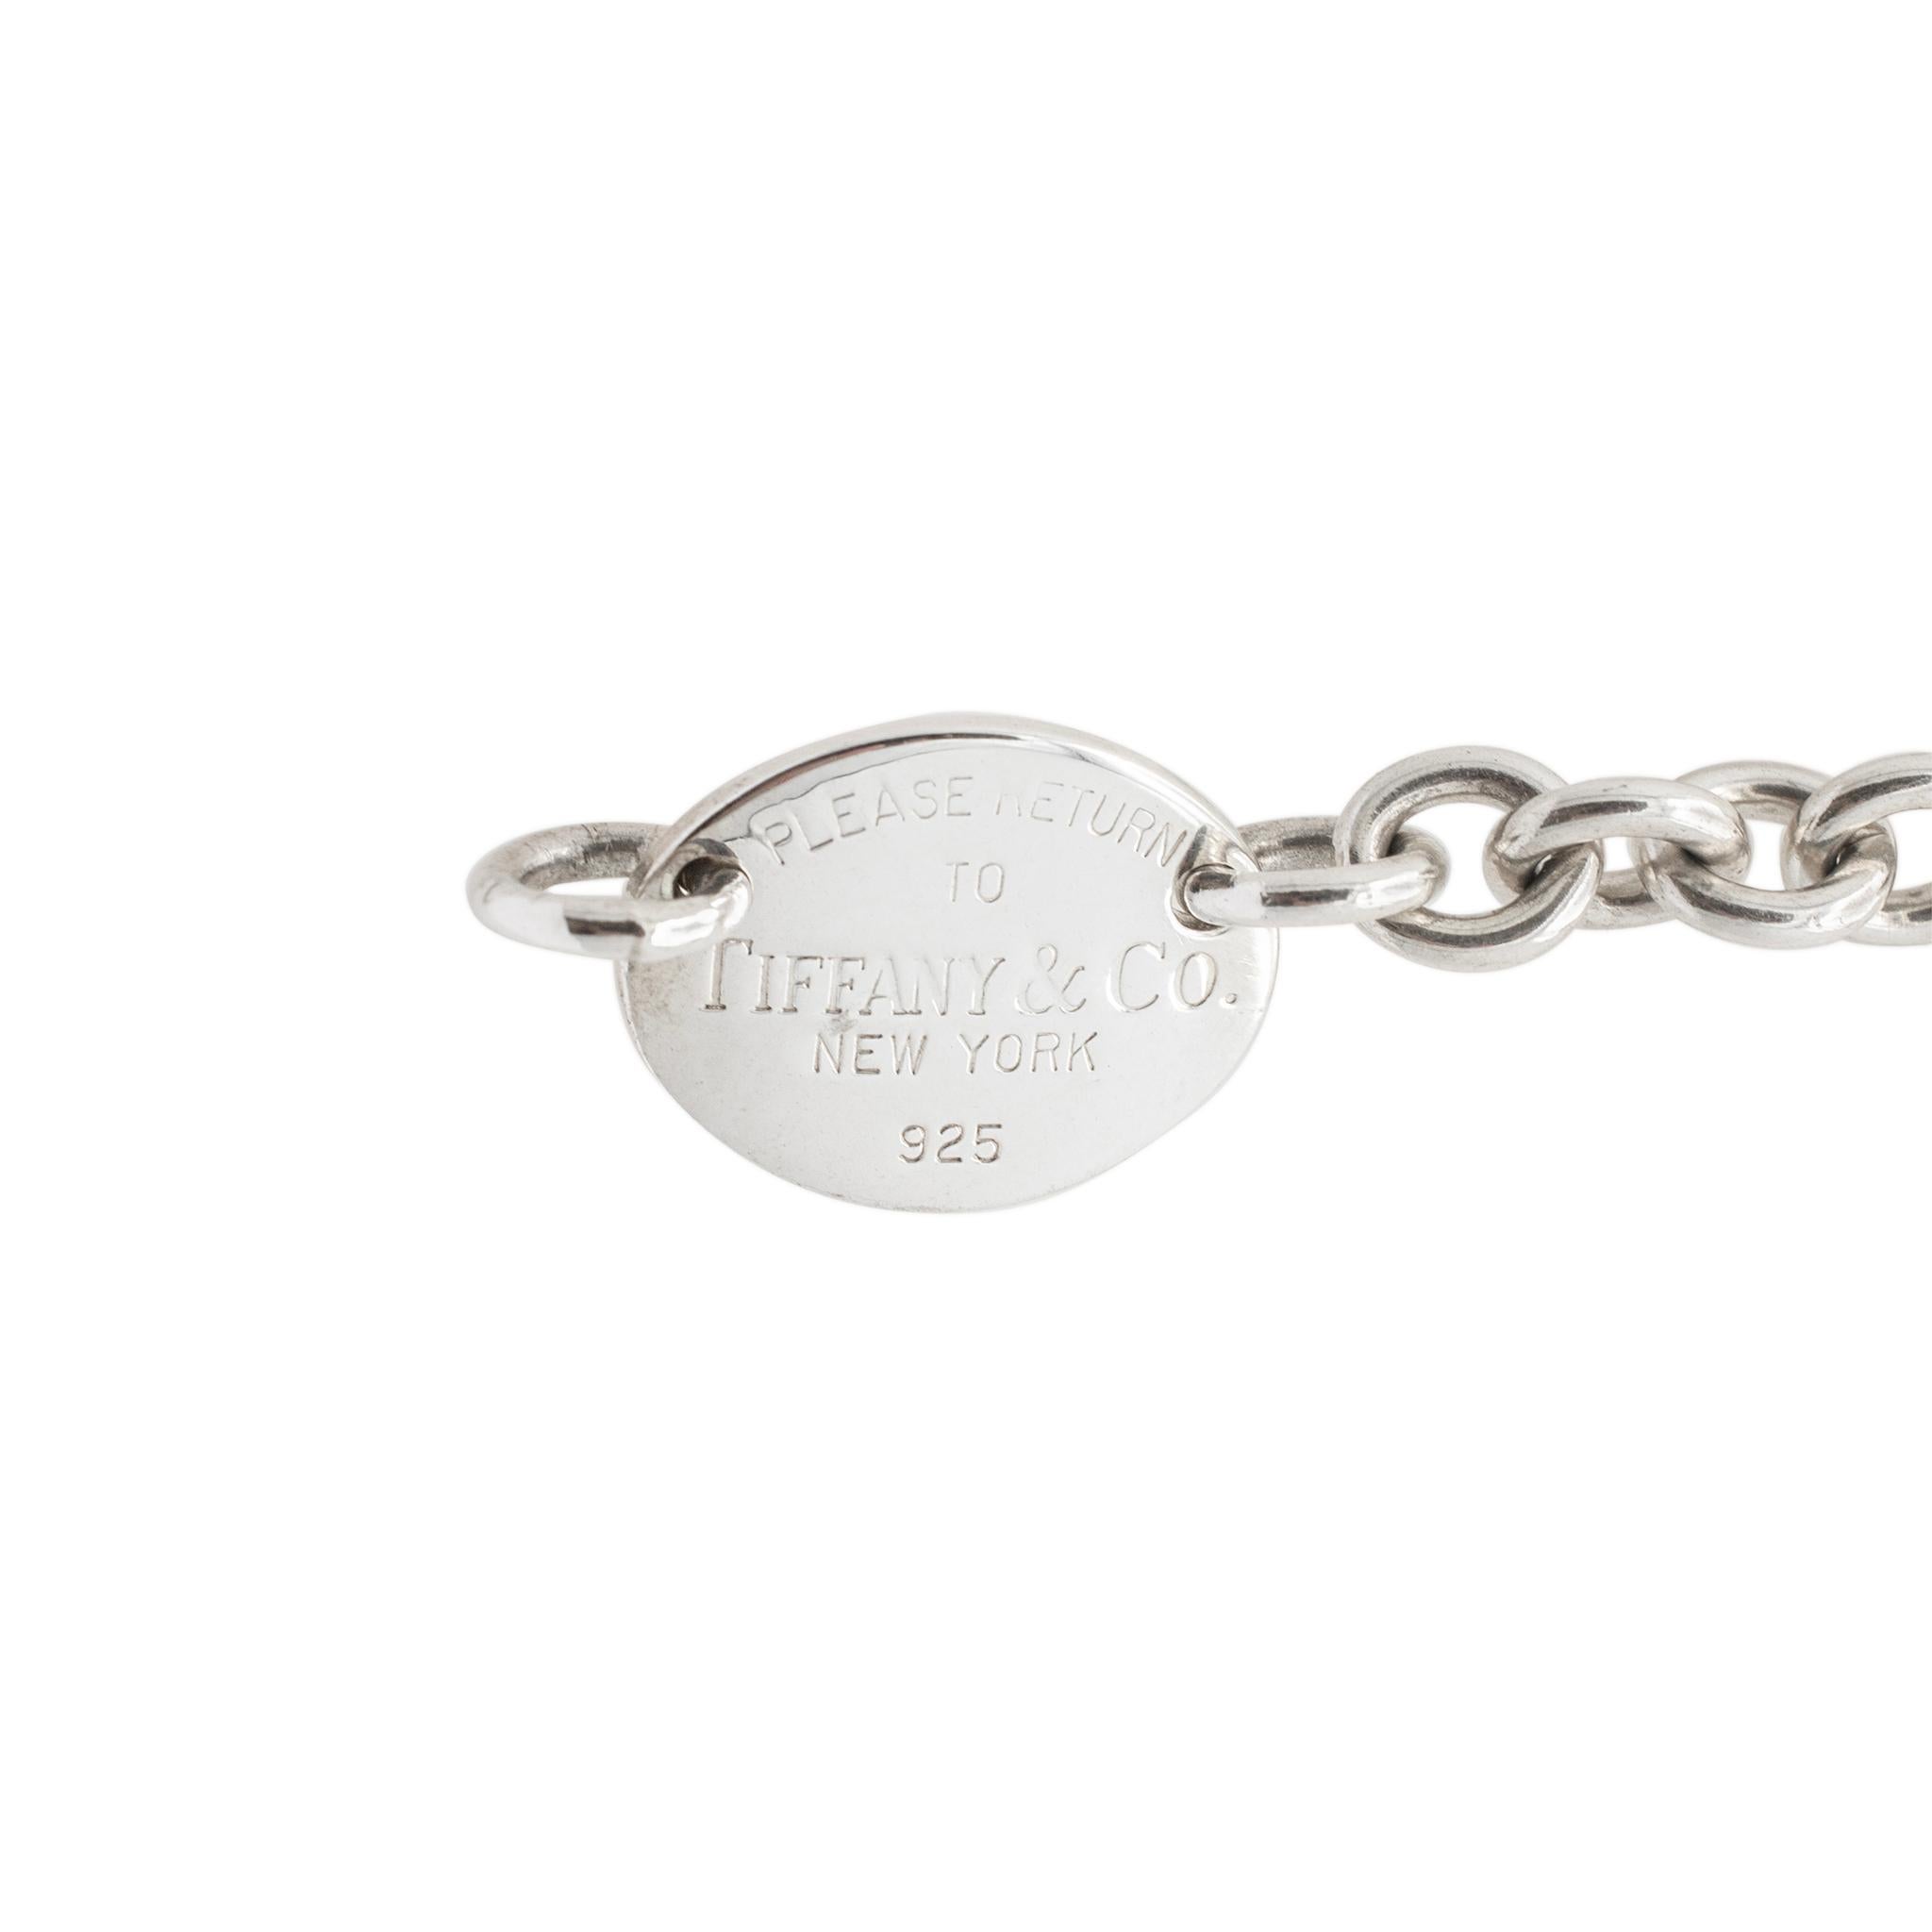 Brand: Tiffany & Co.

Gender: Ladies

Metal Type: 925 Sterling Silver

Length: 15.00 Inches

Links Width: 7.80 mm

Pendant measure: 18.00mm x 22.50mm

Weight: 2.20 grams

Pre-owned in excellent condition. Might shows minor signs of wear.

Silver